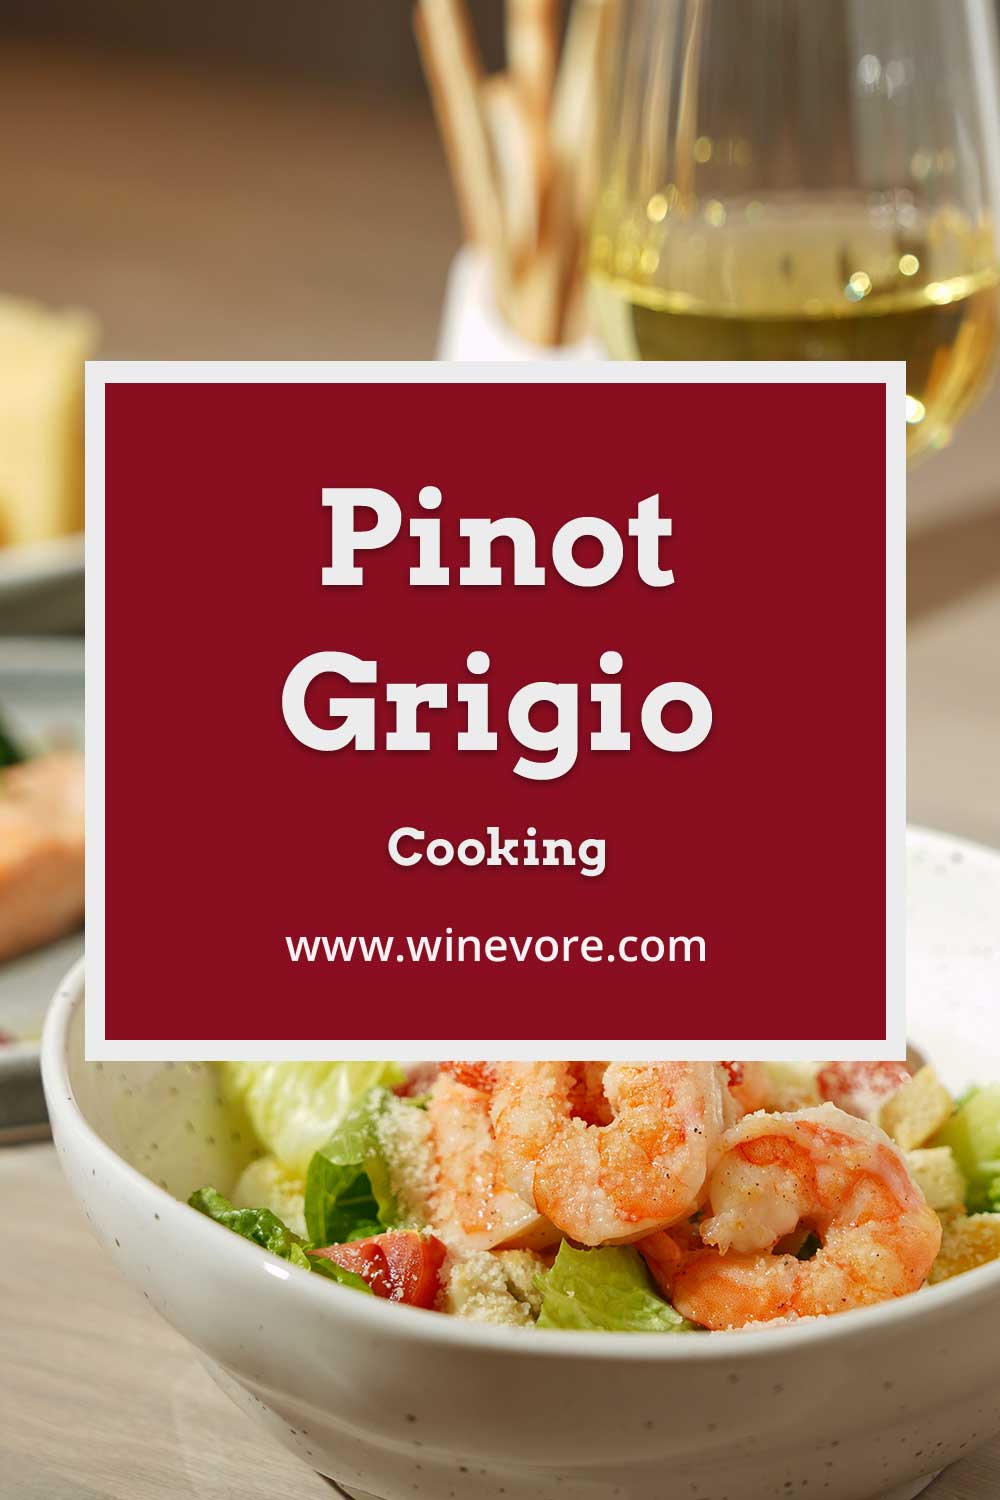 Cooked prawn in a small white bowl with a wine glass behind it - Pinot Grigio Cooking.